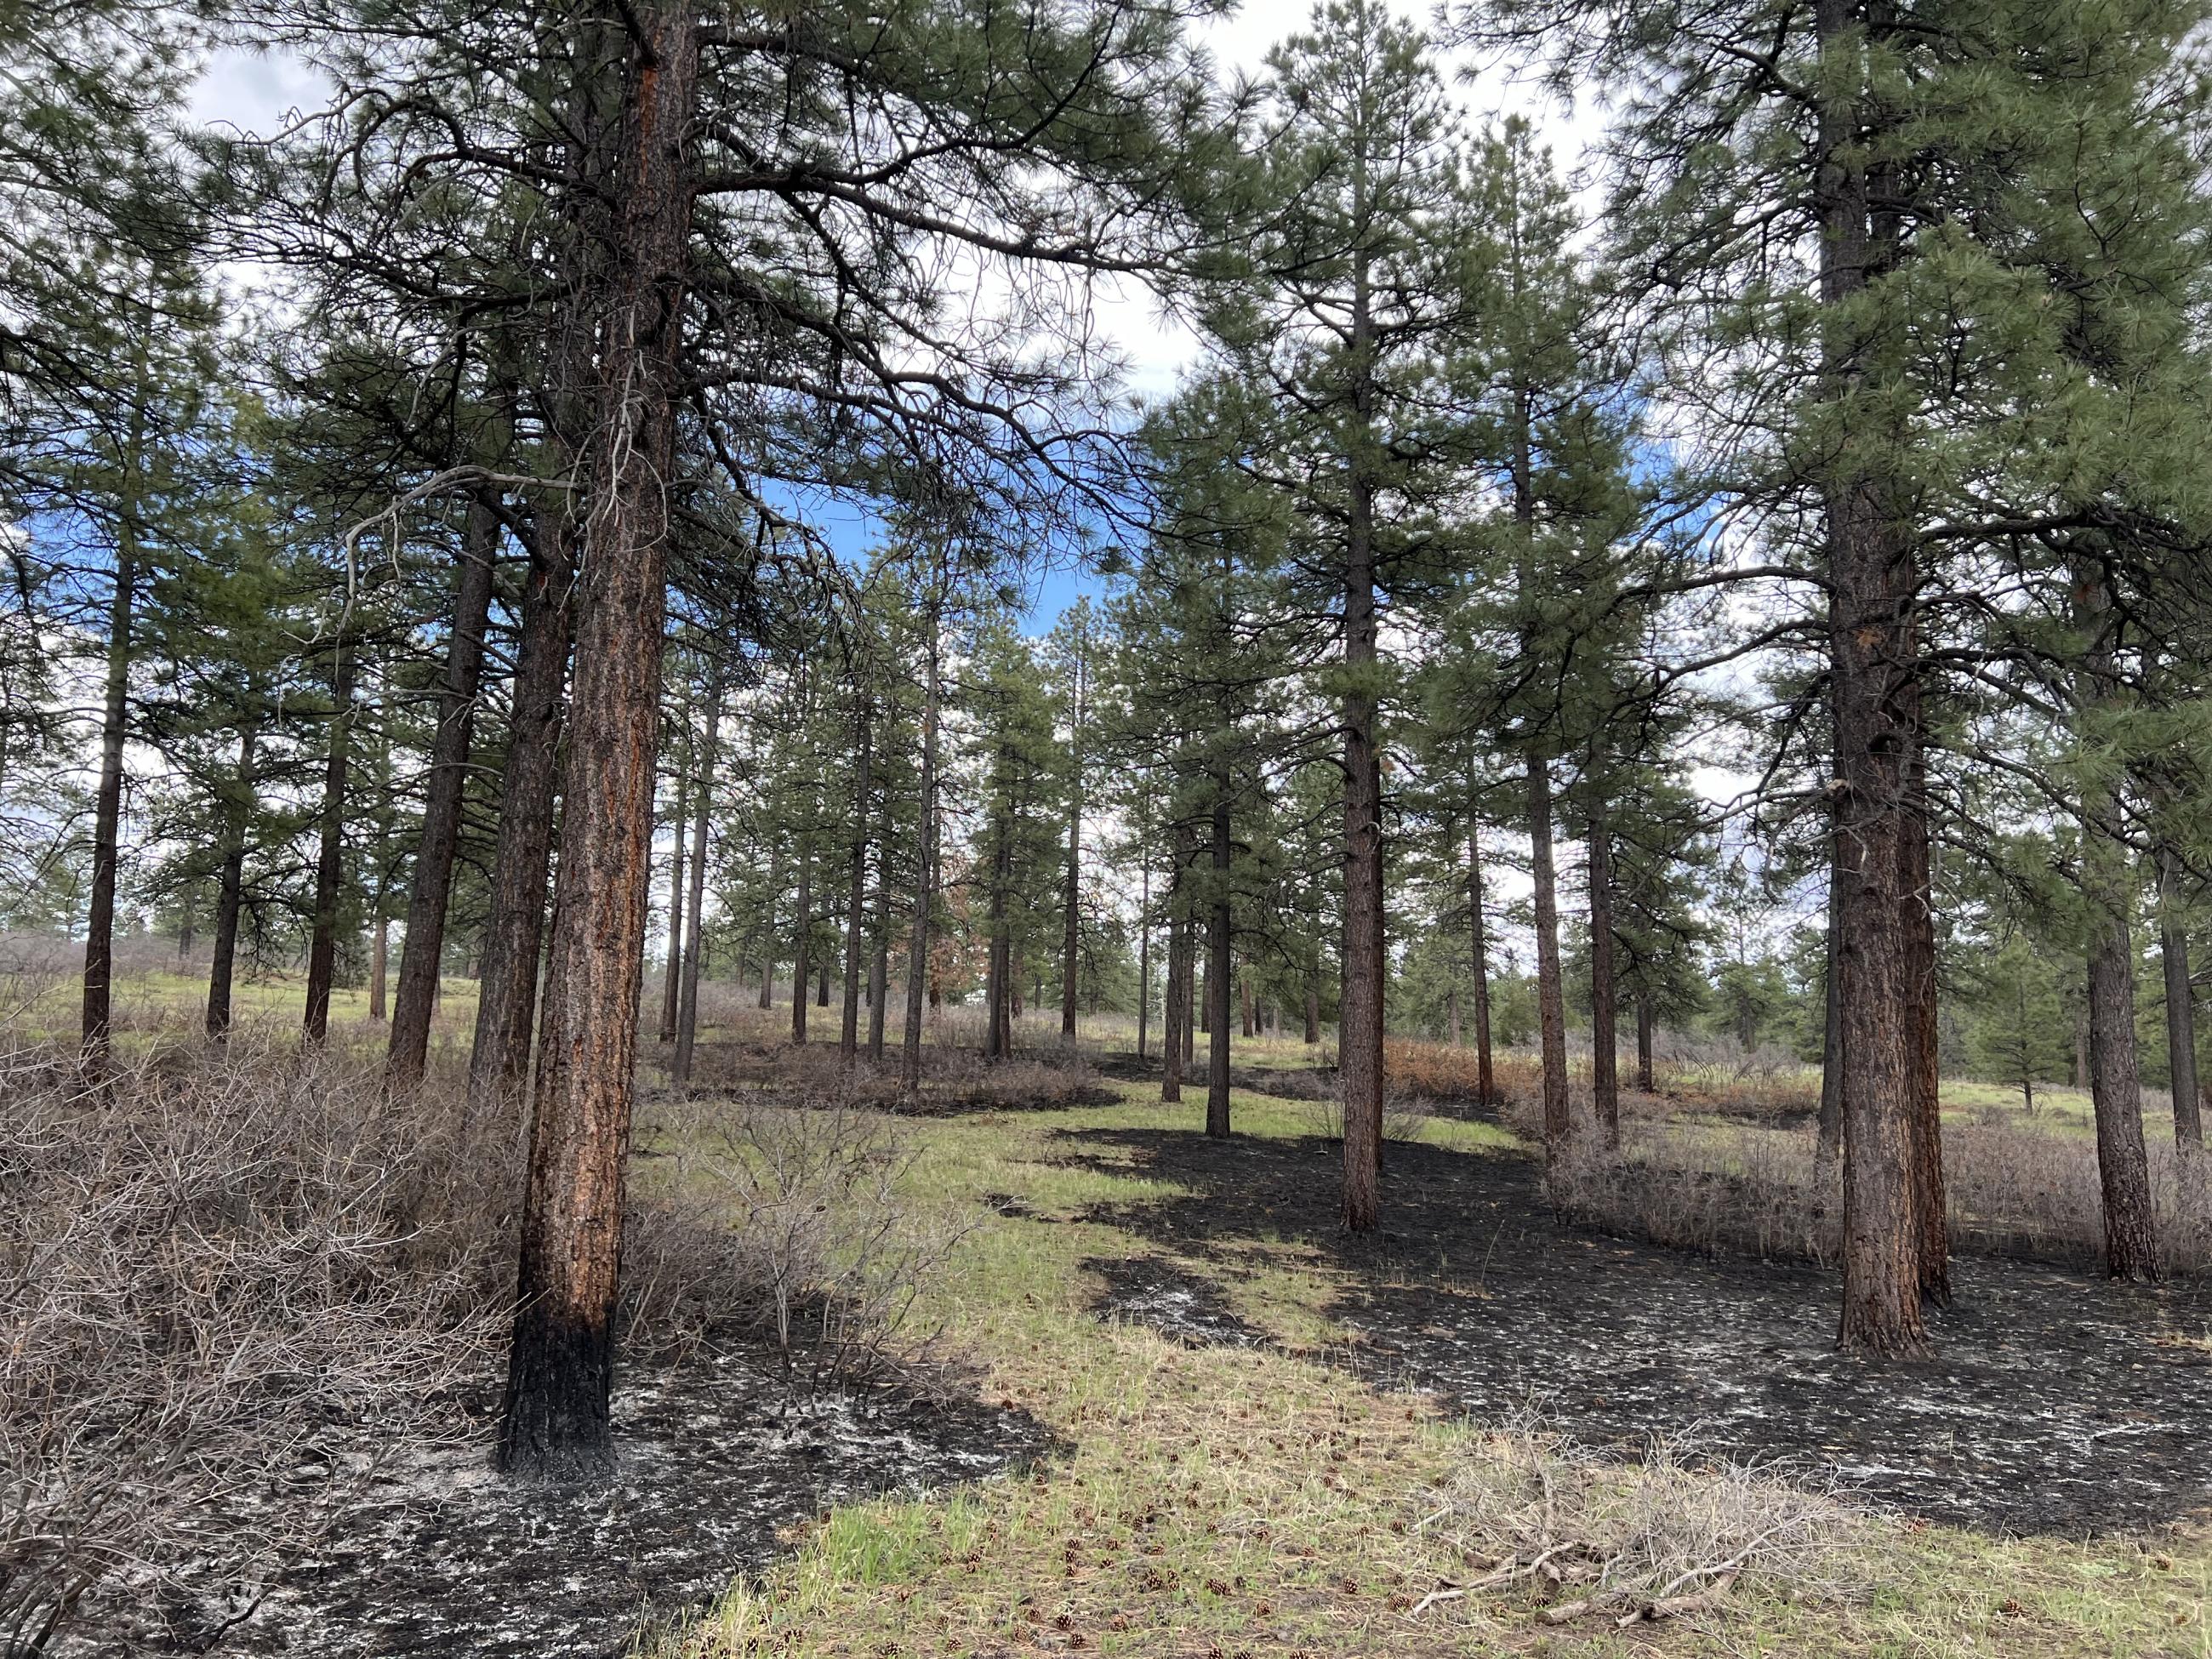 A Ponderosa Pine forest is shown with patches of burned areas around some of the trees with green grass between.